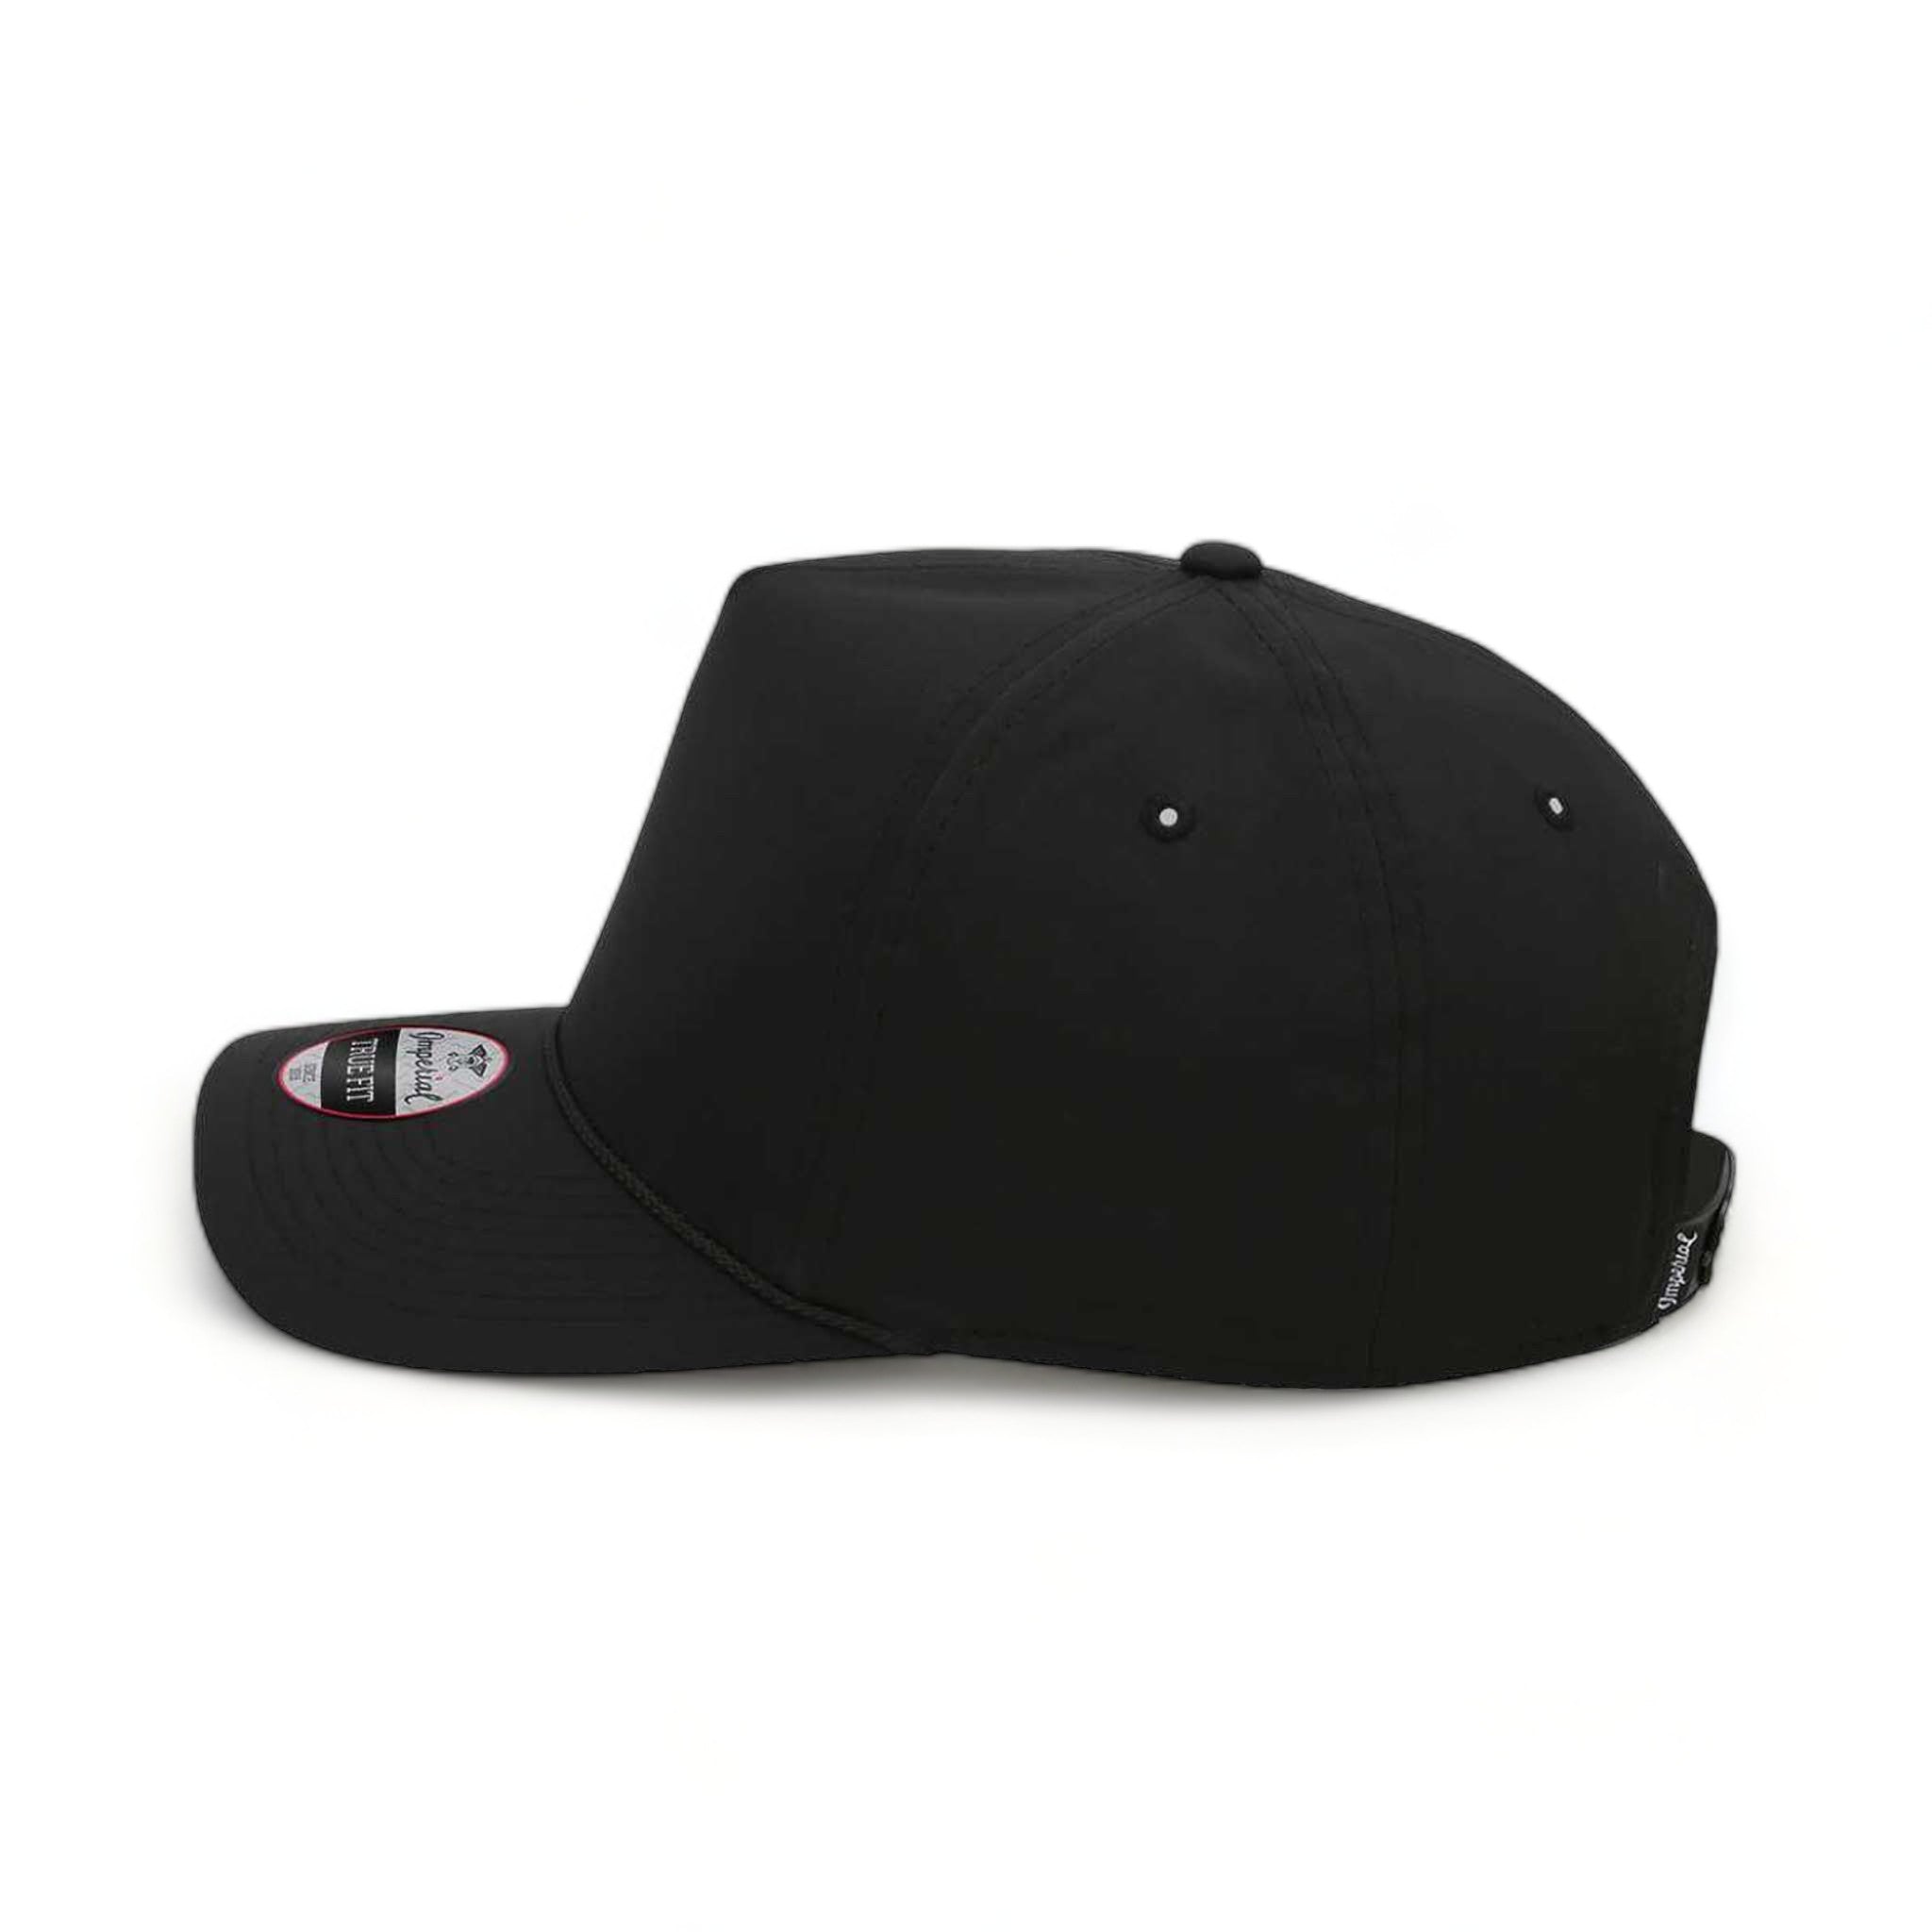 Side view of Imperial 5054 custom hat in black and black